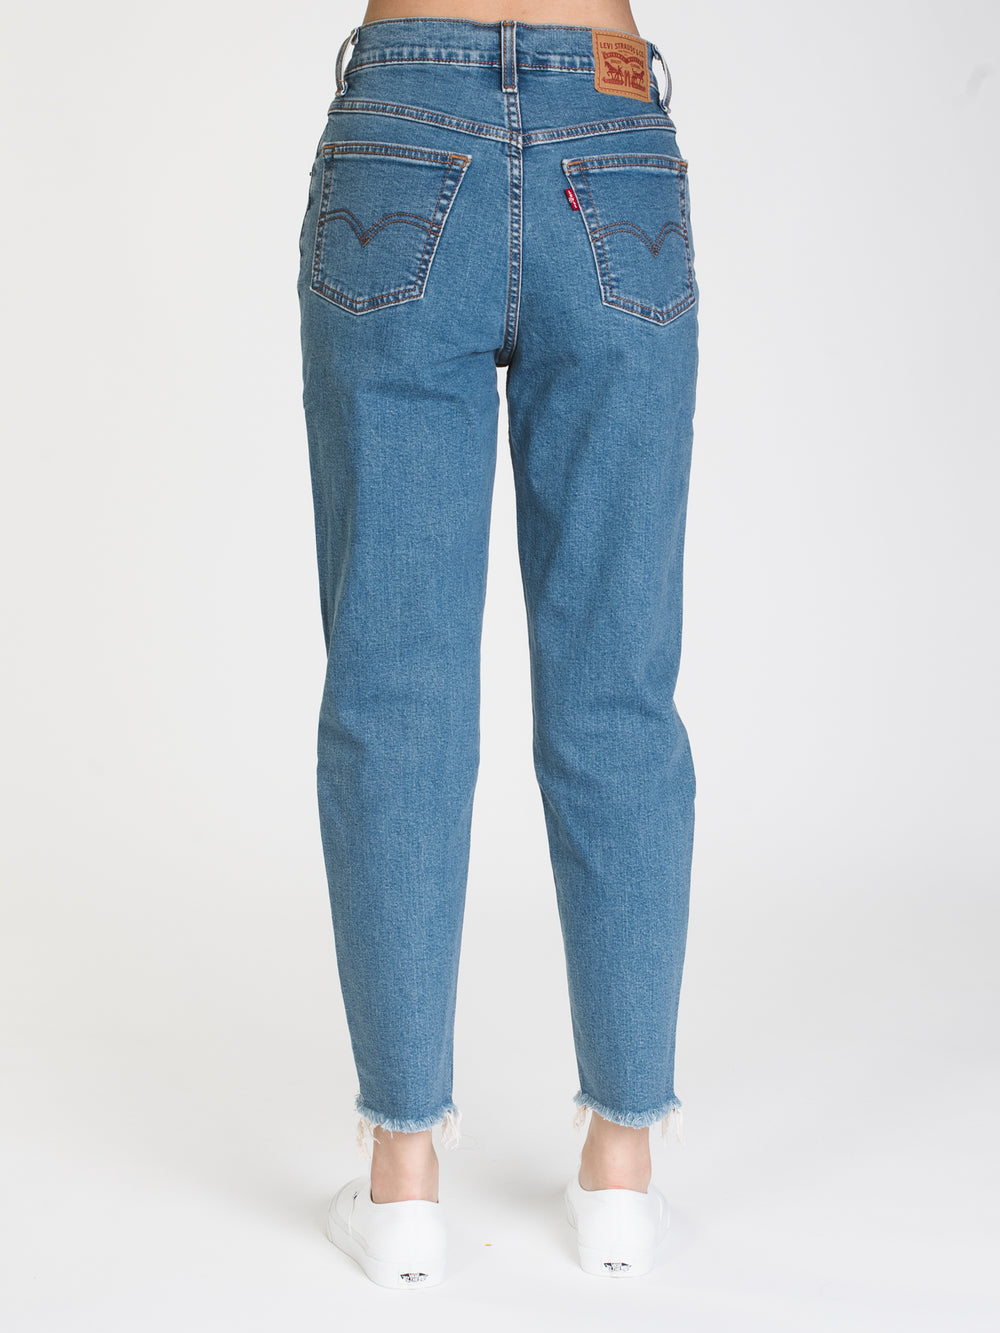 LEVIS MOM JEAN FRINGE ANKLE  - CLEARANCE